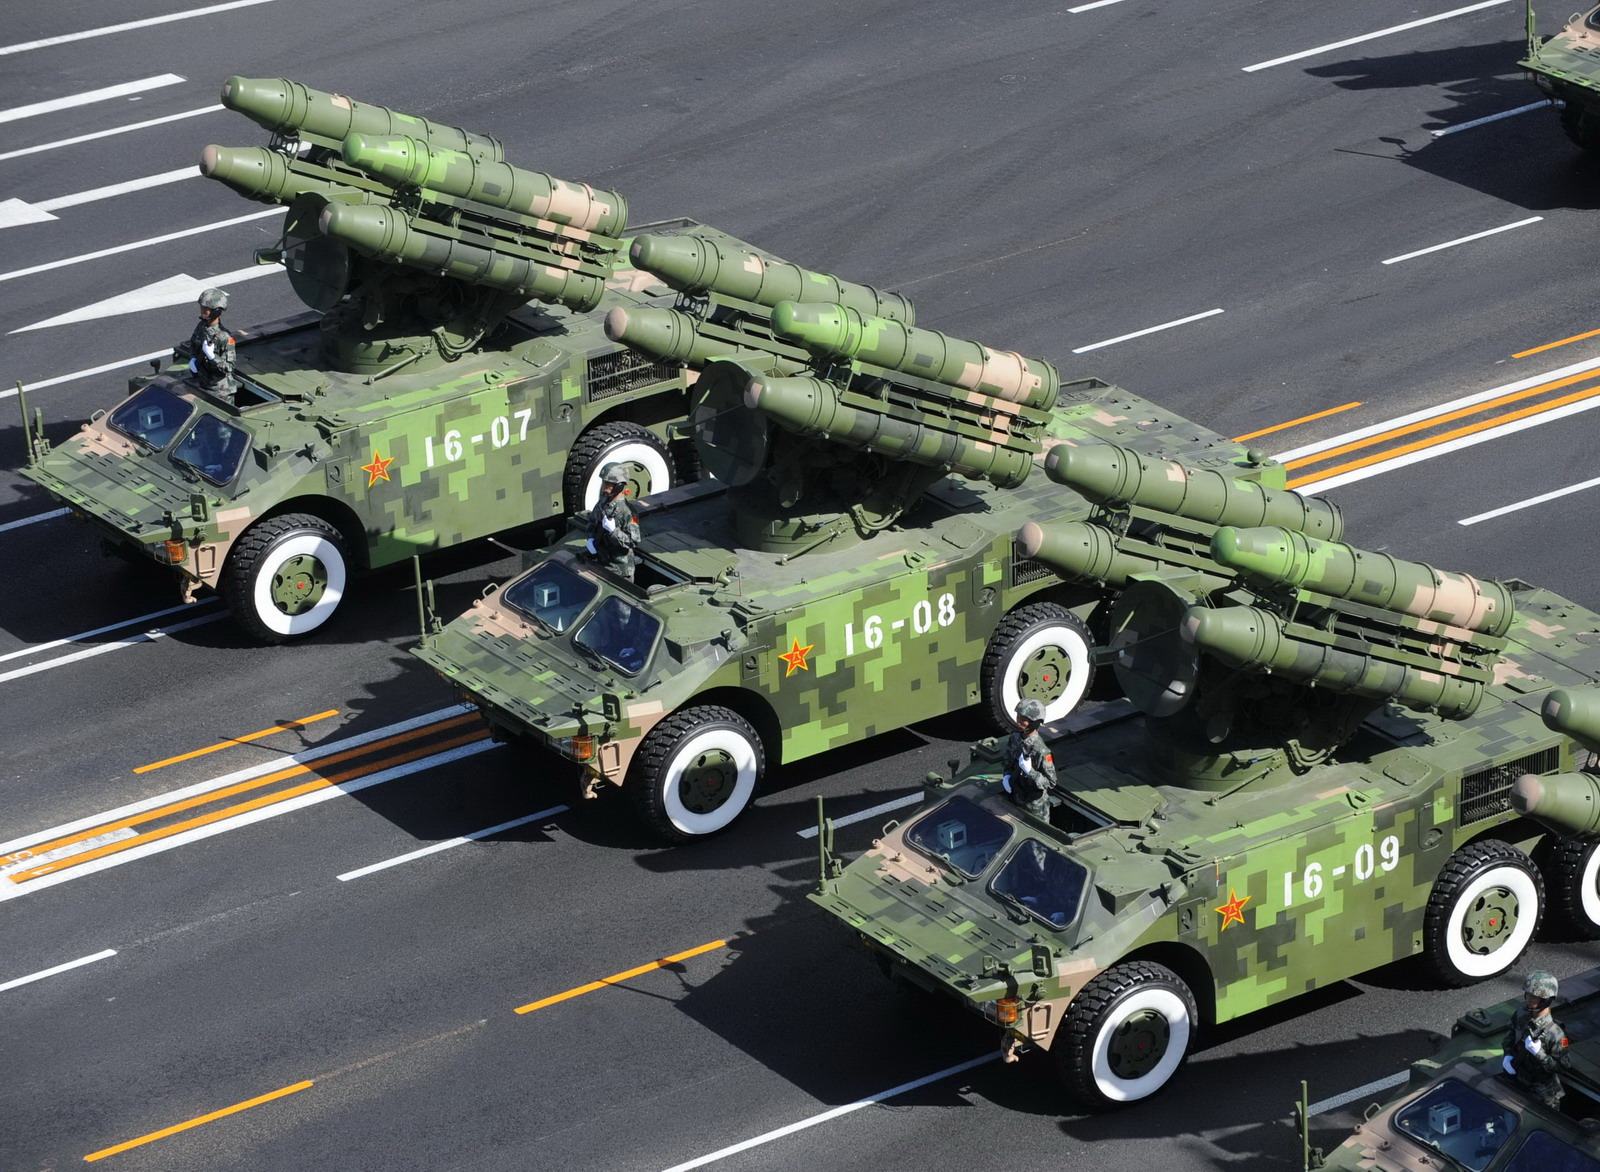 HongQi+7+%2528HQ-7%2529+FeiMeng+80+%2528FM-80%2529+export+FM-90+surface-to-air+missile+%2528SAM%2529+Crotale+air-defence+missile+BANGLADESH+CHINA+PLA+PLAAF+AIR+FROCE+%25287%2529.jpg